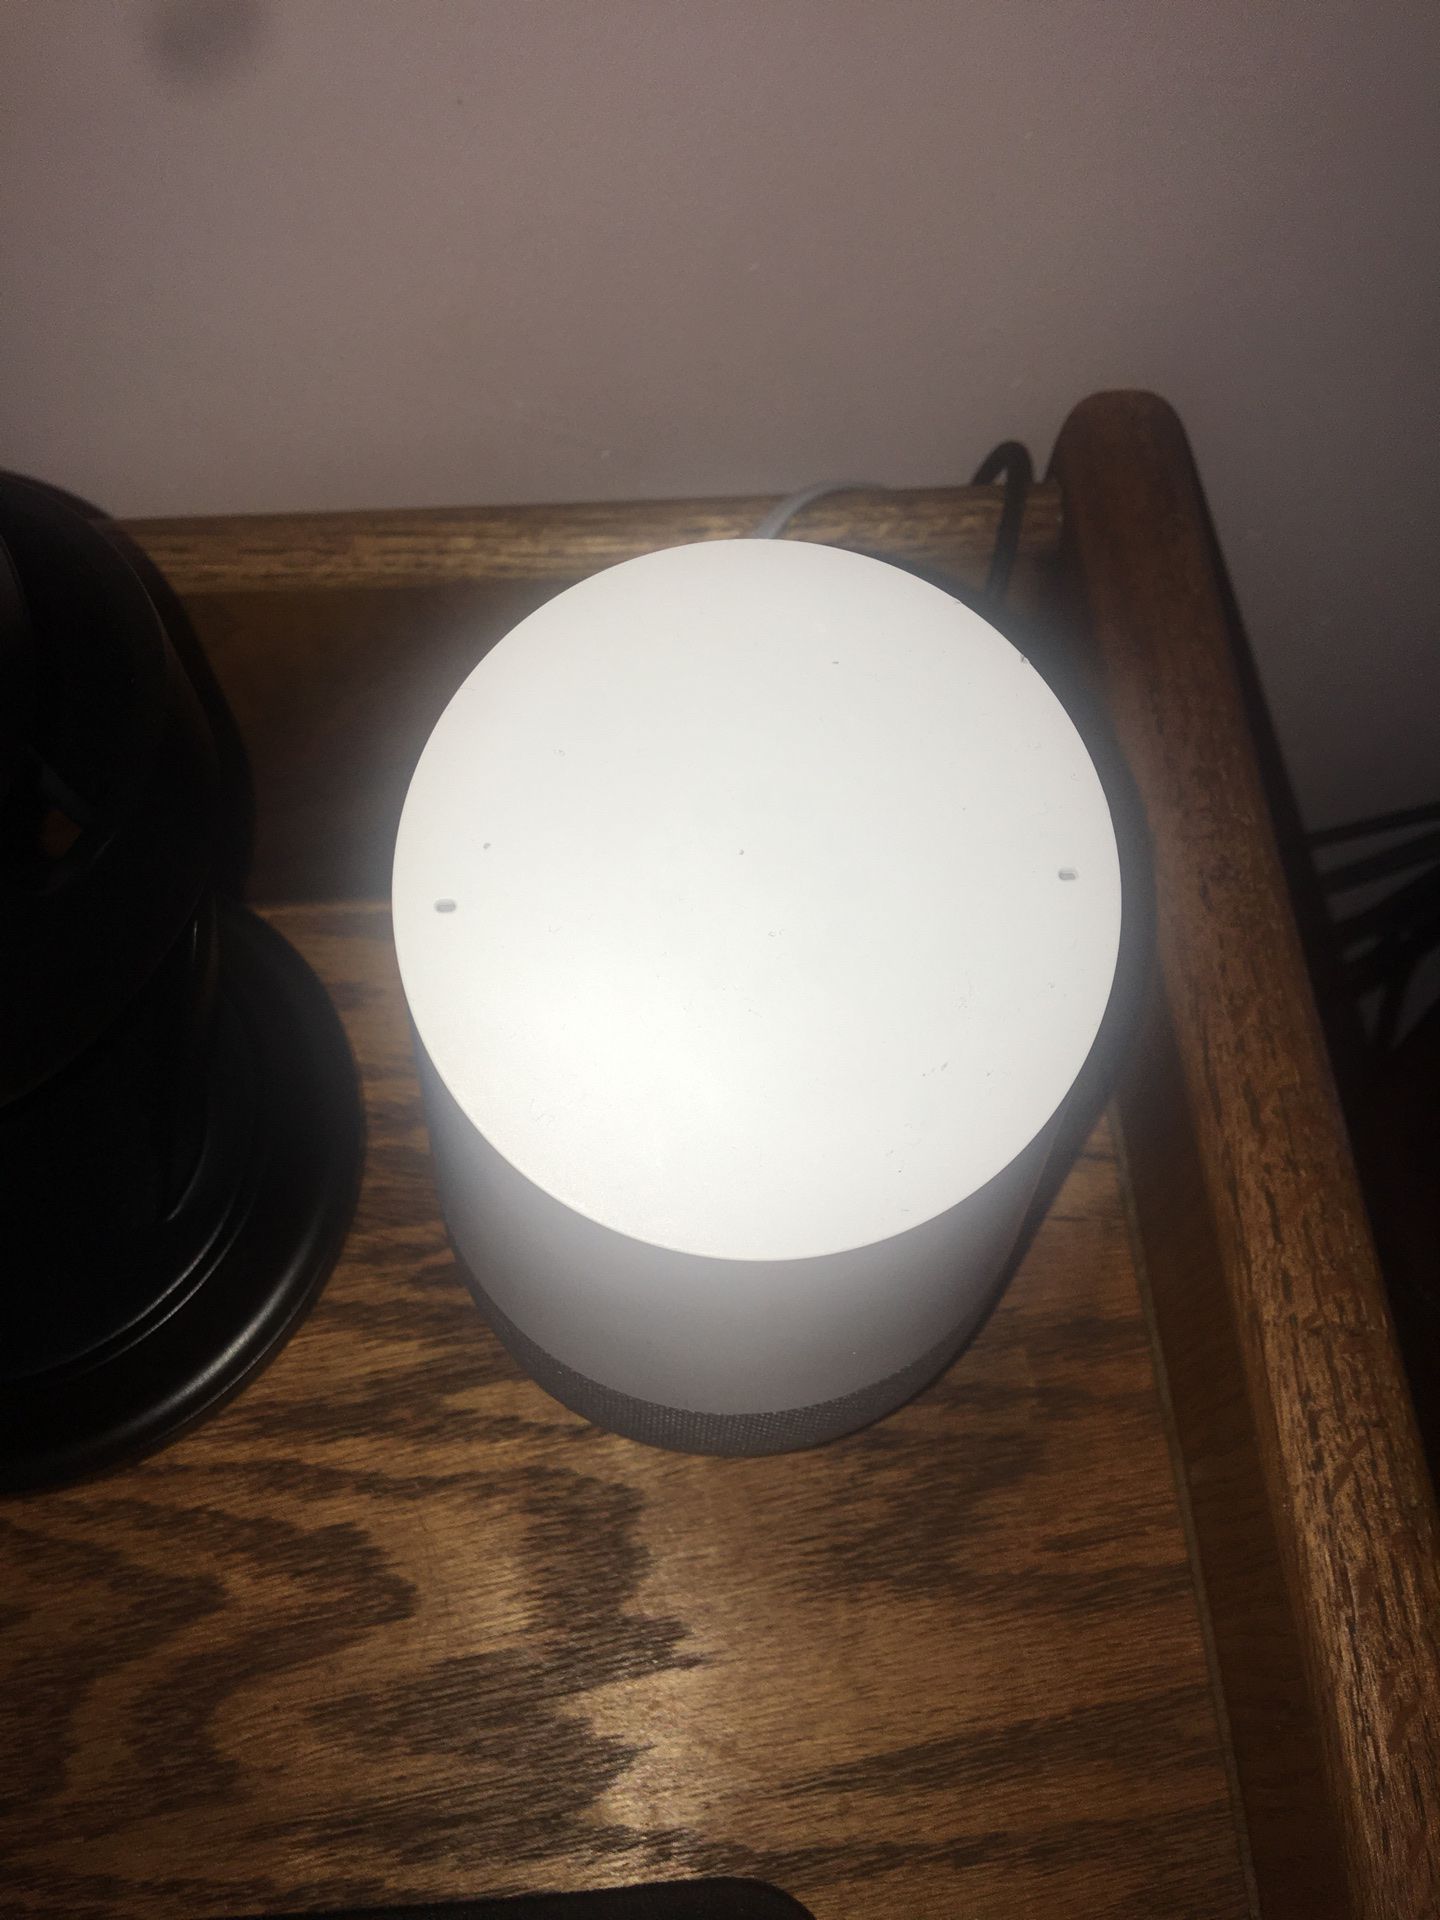 CHEAPEST AND BEST GOOGLE HOME ! GET FAST!